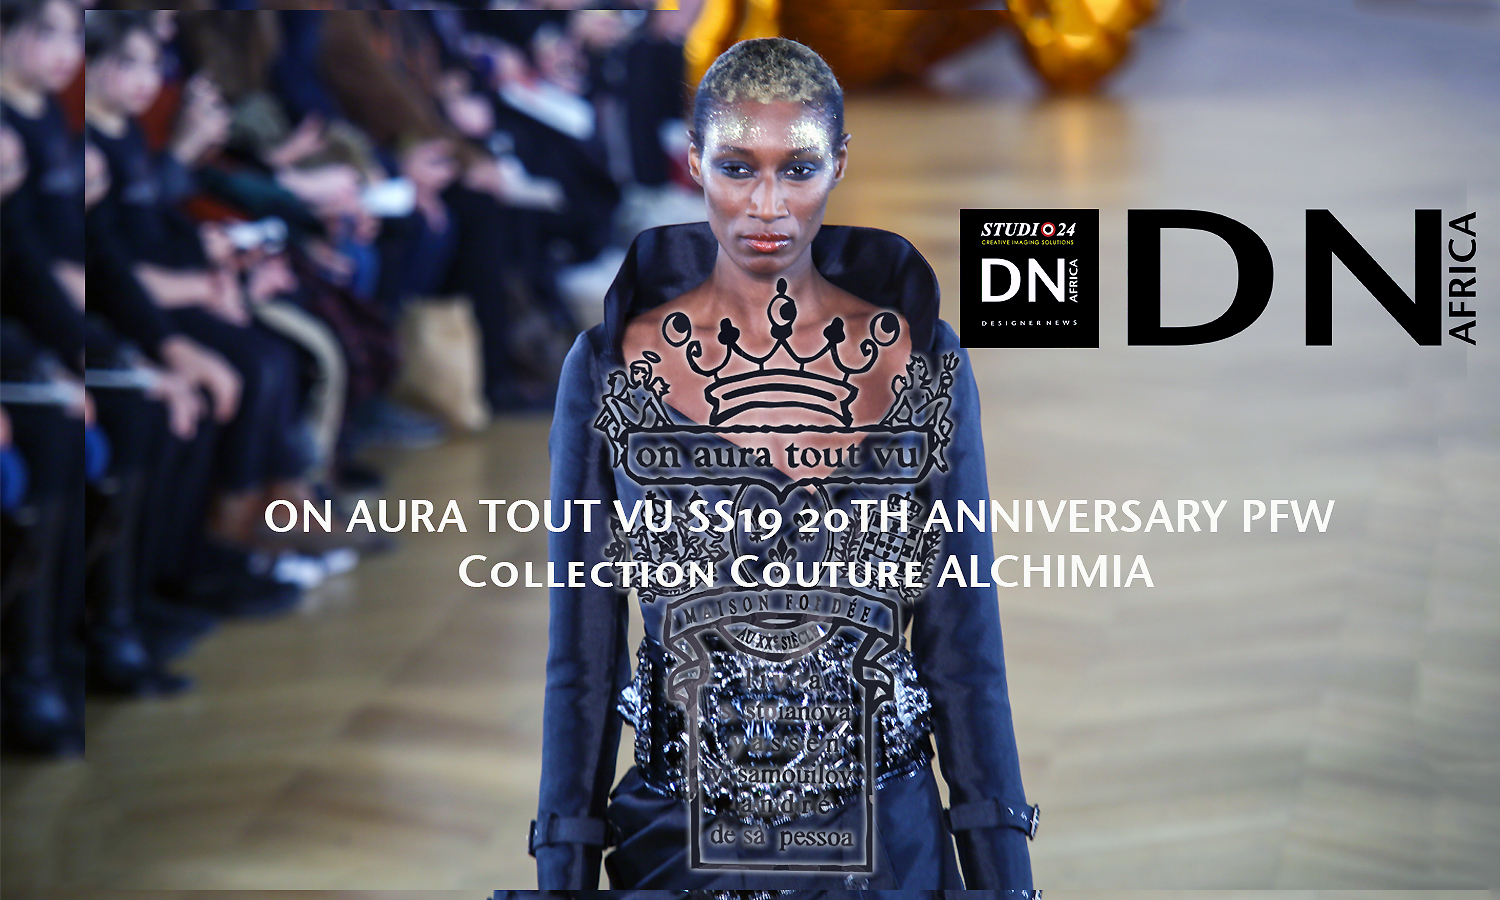 AFRICAN FASHION STYLE MAGAZINE - ON AURA TOUT VU SS19 20TH ANNIVERSARY PFW - Collection Couture ALCHIMIA - Mairie du 4eme-PR L'APPART PR - Official Media Partner DN AFRICA -STUDIO 24 NIGERIA - STUDIO 24 INTERNATIONAL - Ifeanyi Christopher Oputa MD AND CEO OF COLVI LIMITED AND STUDIO 24 - CHEVEUX CHERIE STUDIO BY MARIEME DUBOZ